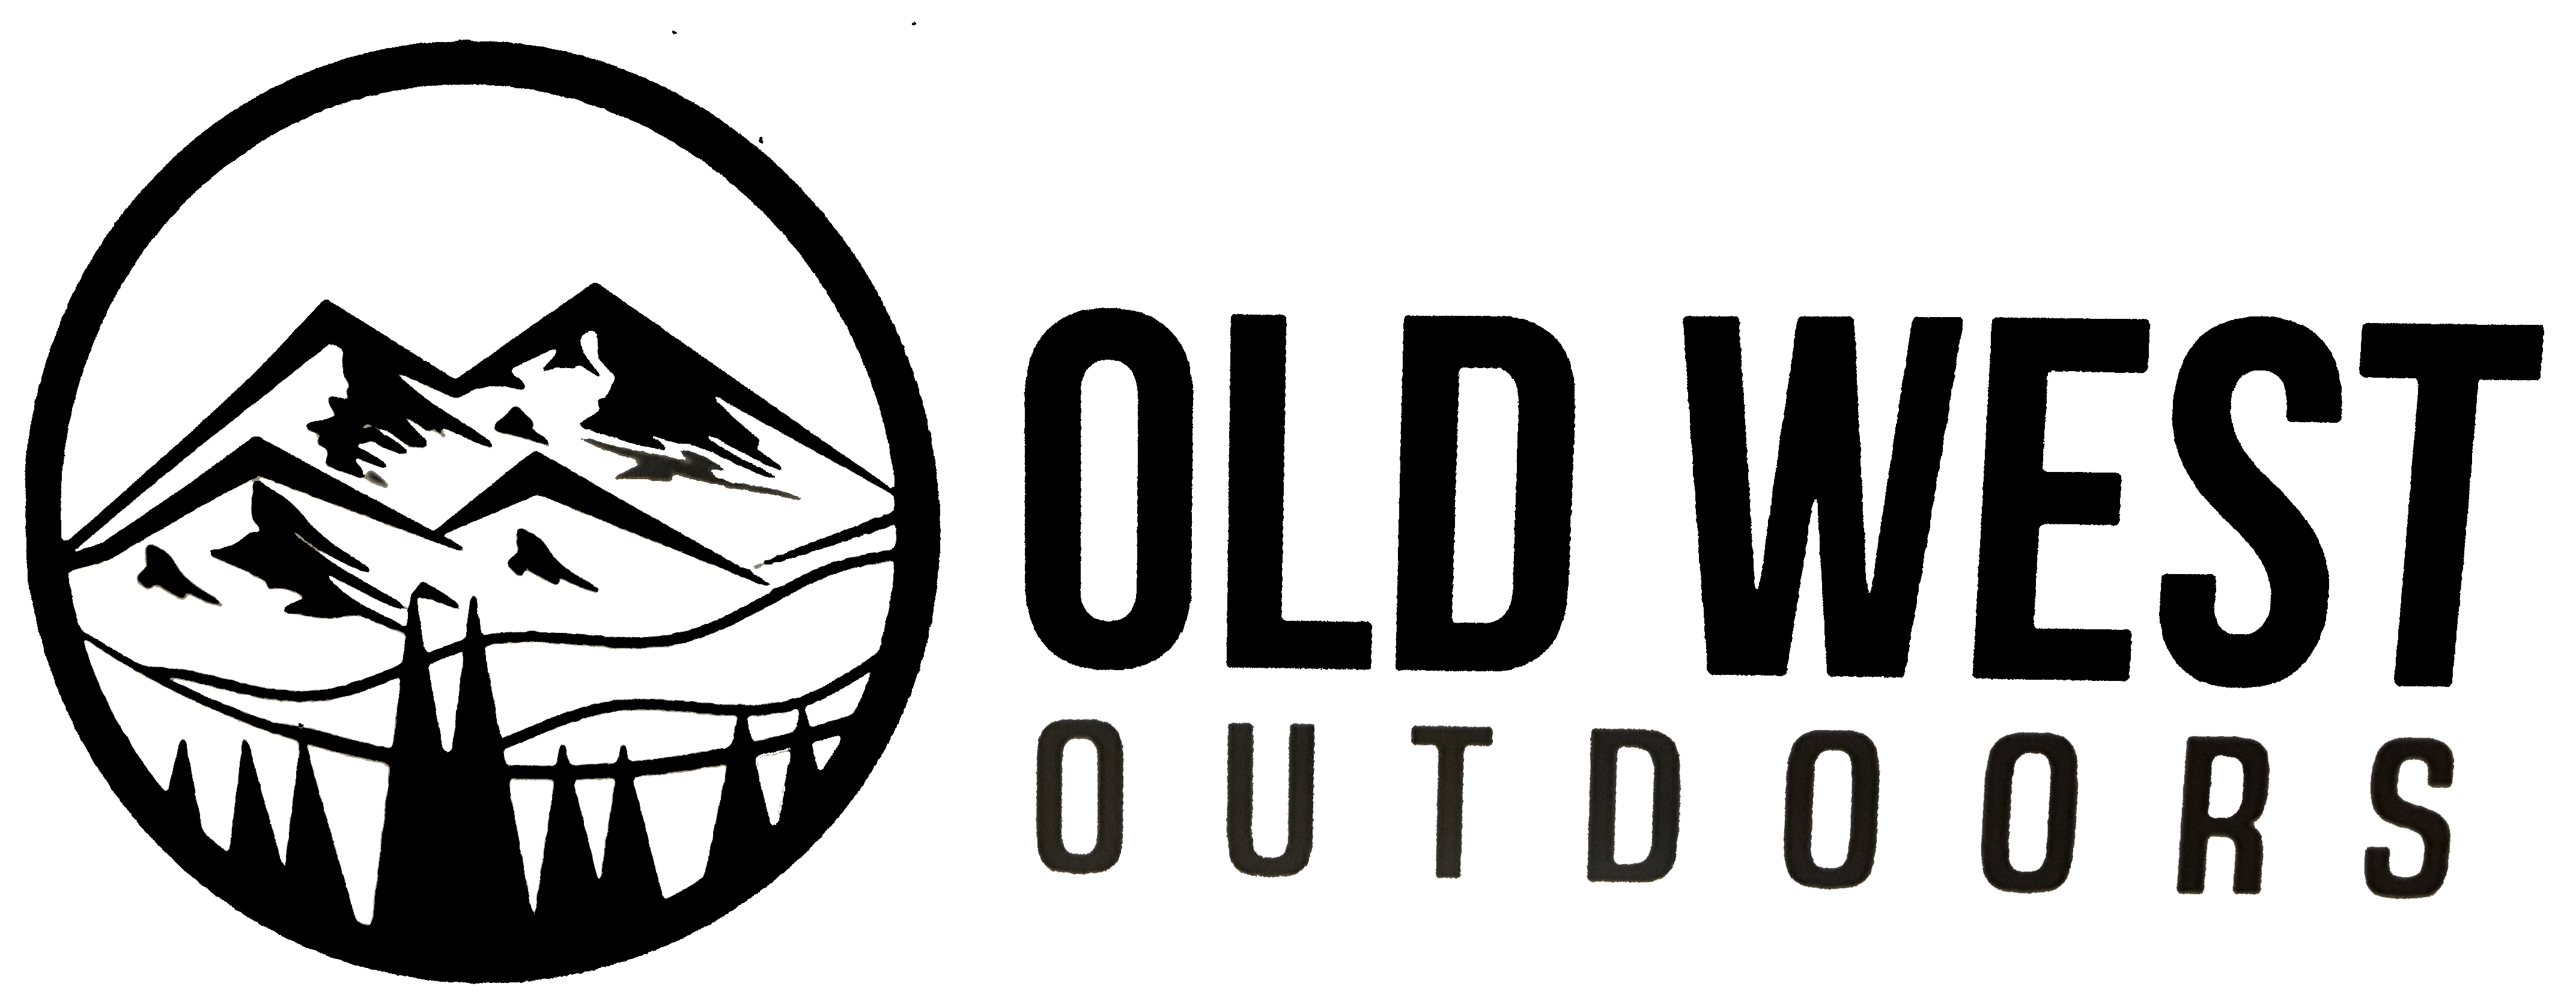 Old Boost Logo - Old West OUTDOORS - 98102 Mens BOOST Brown Genuine Leather Outdoor ...